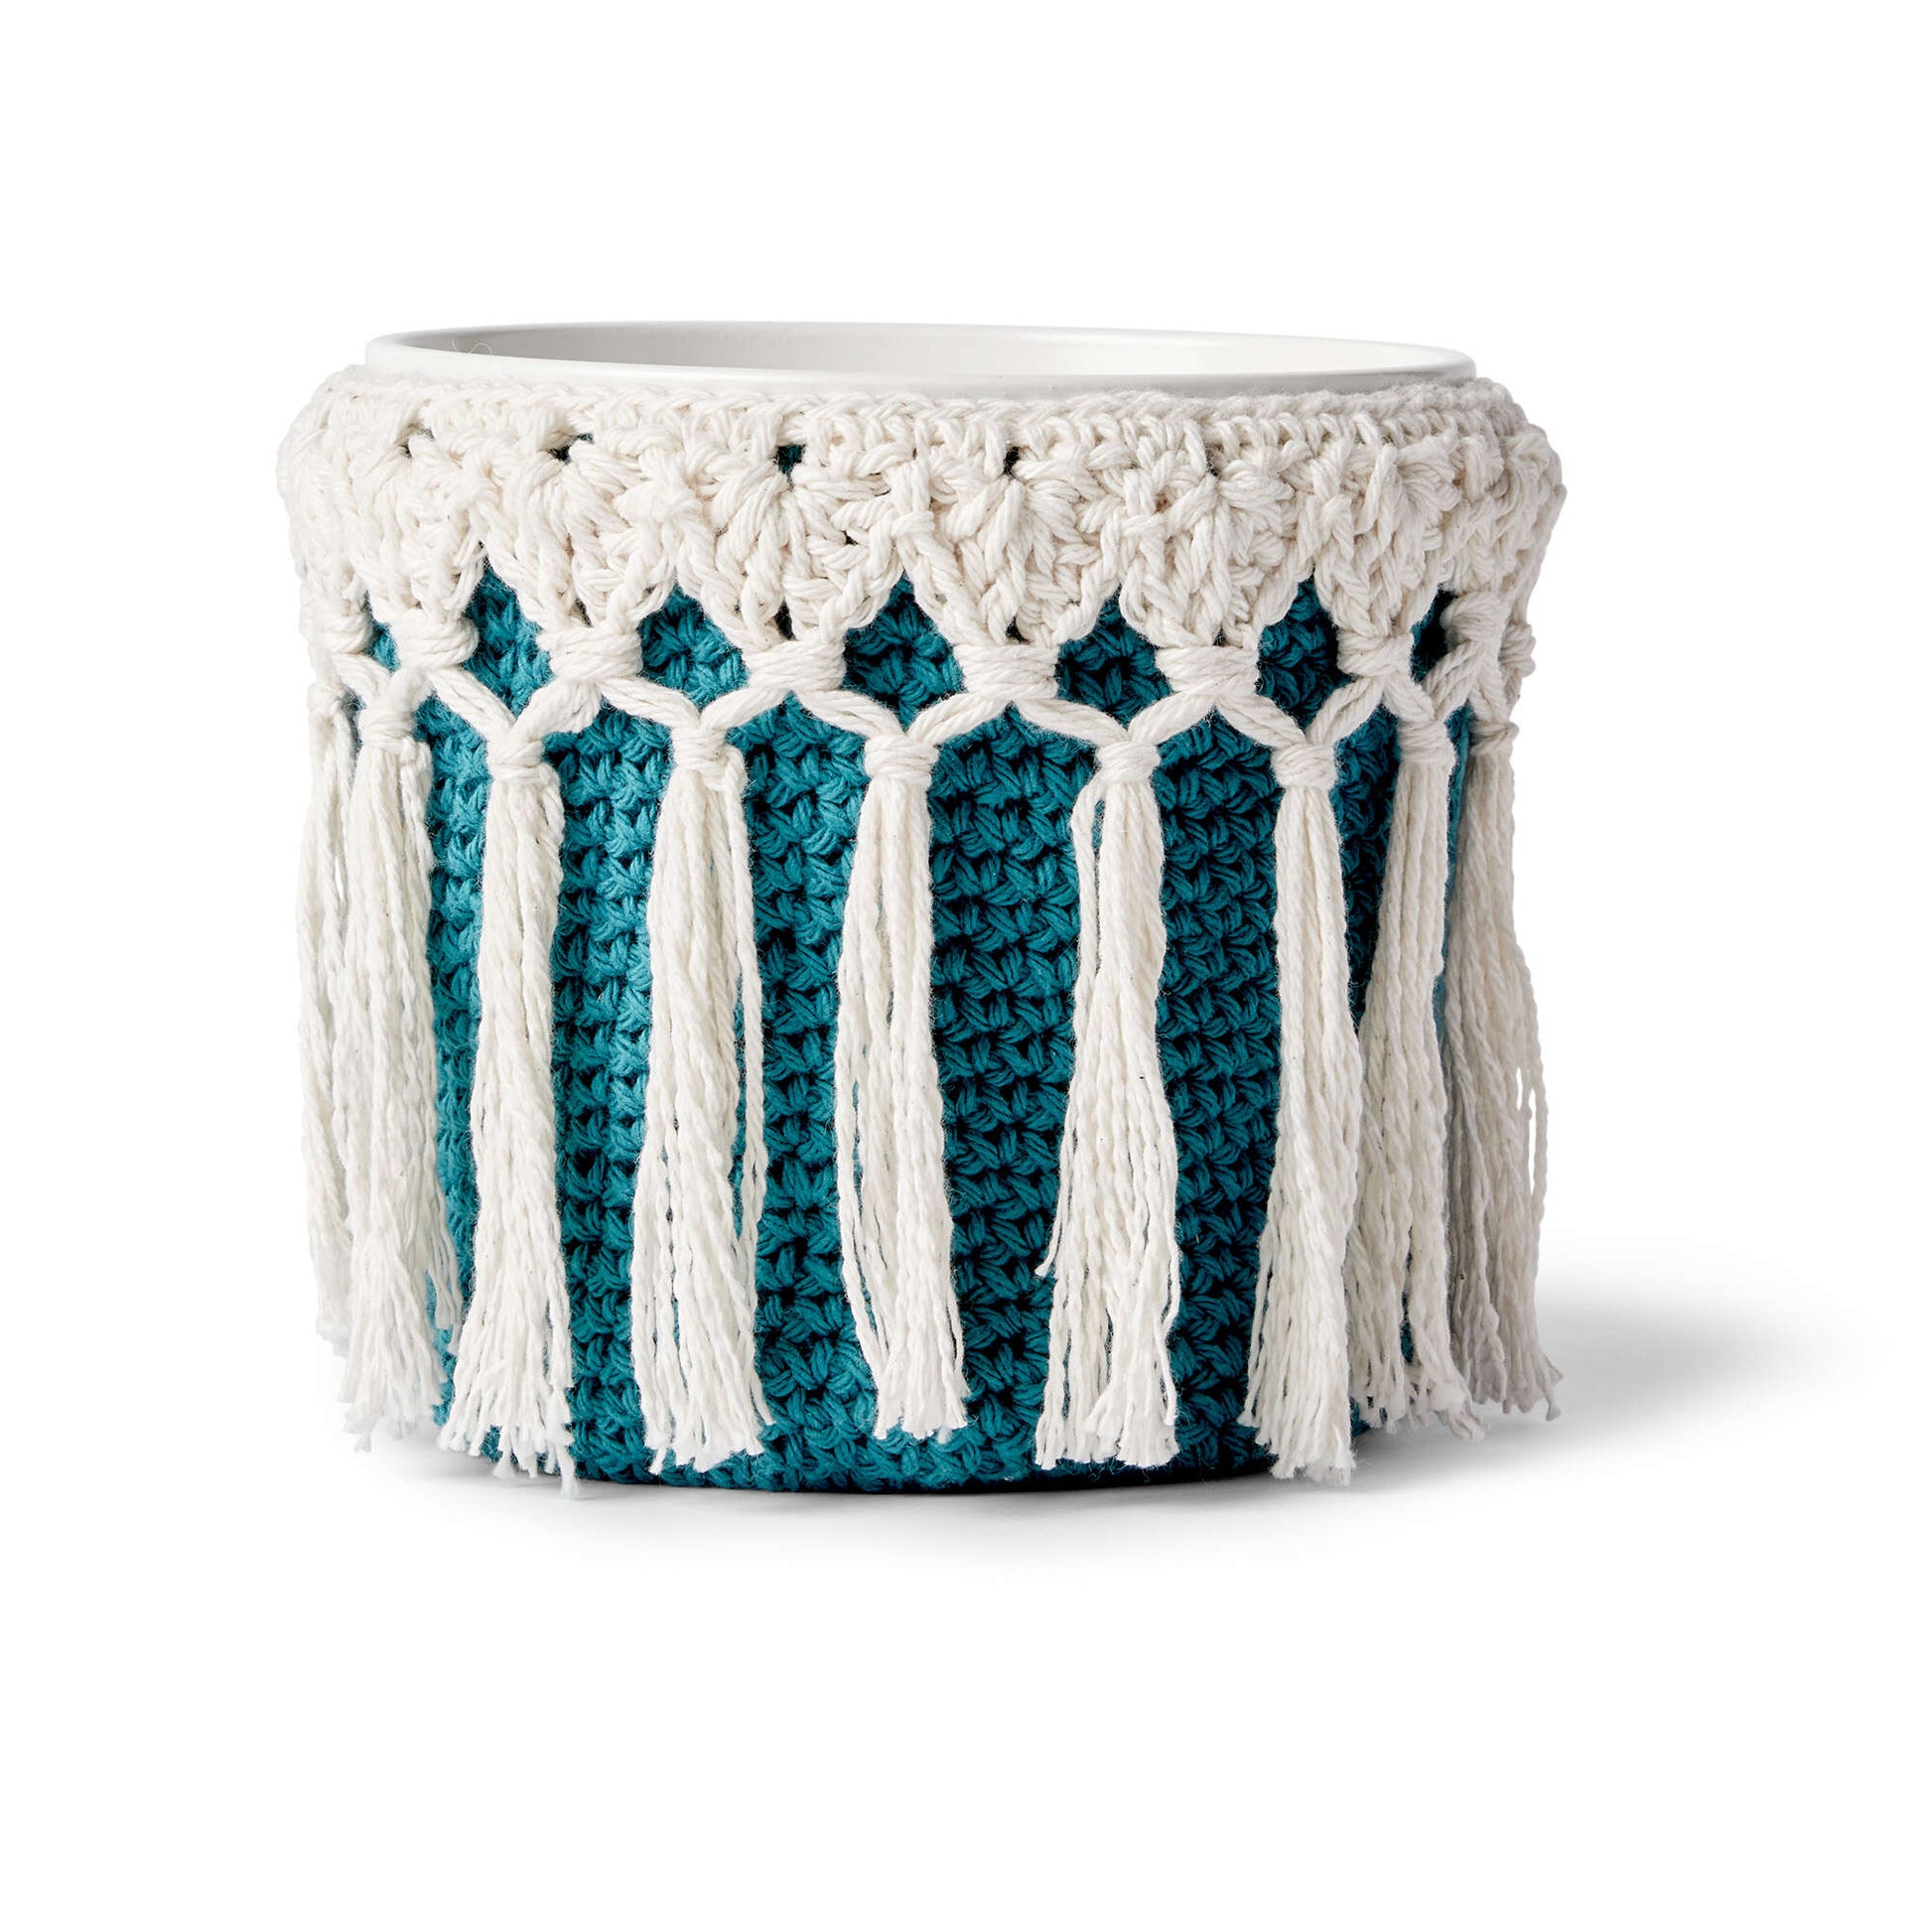 Free Lily Sugar'n Cream Little Potted Plant Crochet Cozy Pattern